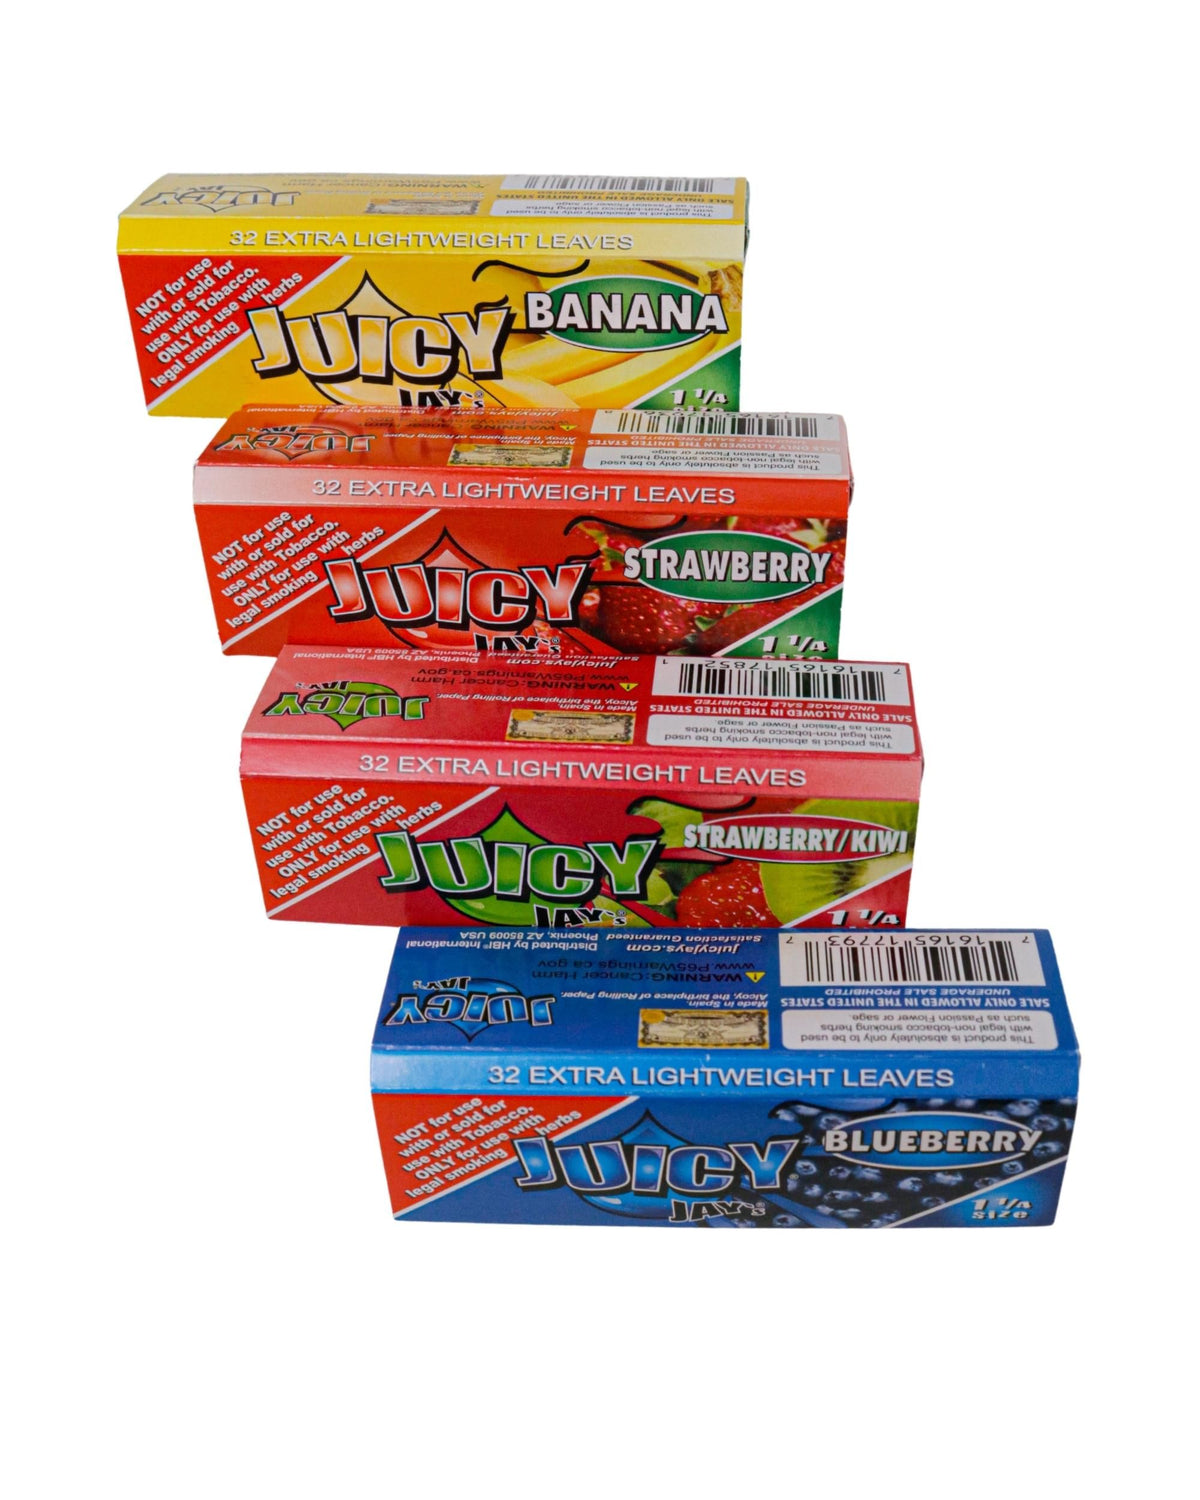 Juicy Jays Flavoured Rolling Papers (1 1/4 size) Juicy Jays